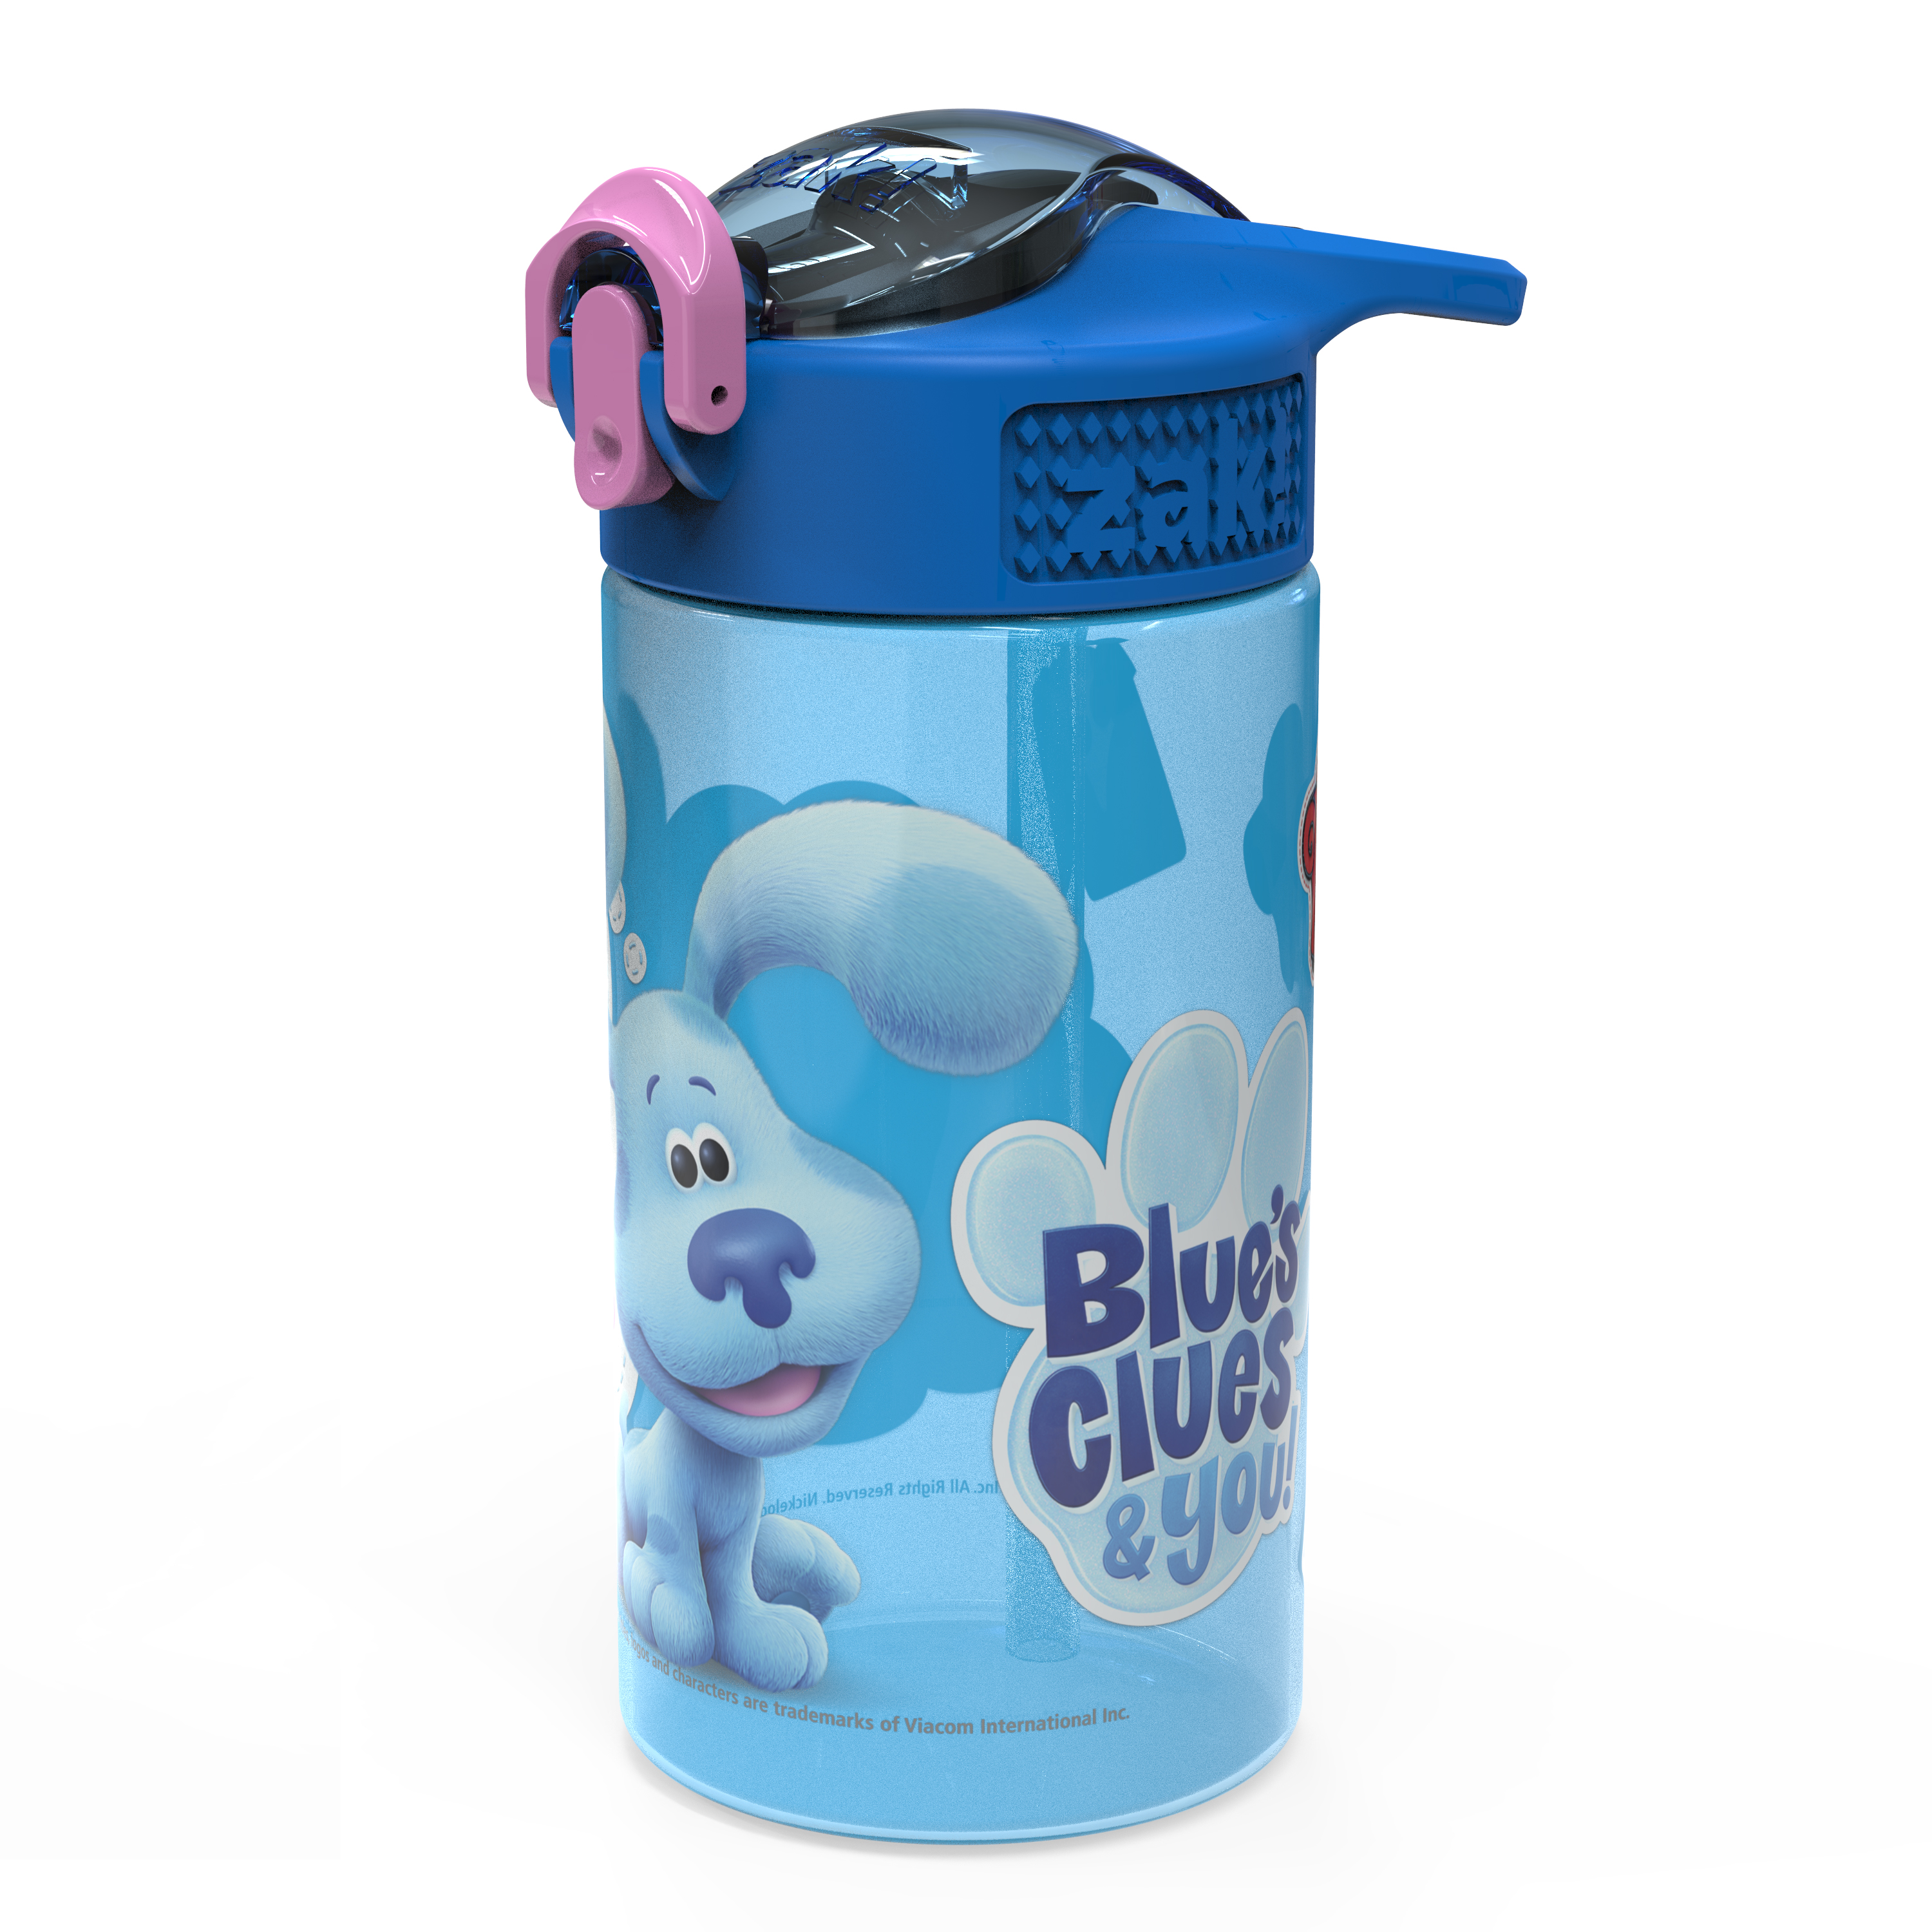 Blues Clues and You 16 ounce Reusable Plastic Water Bottle with Straw, Blue and Friends, 2-piece set slideshow image 6